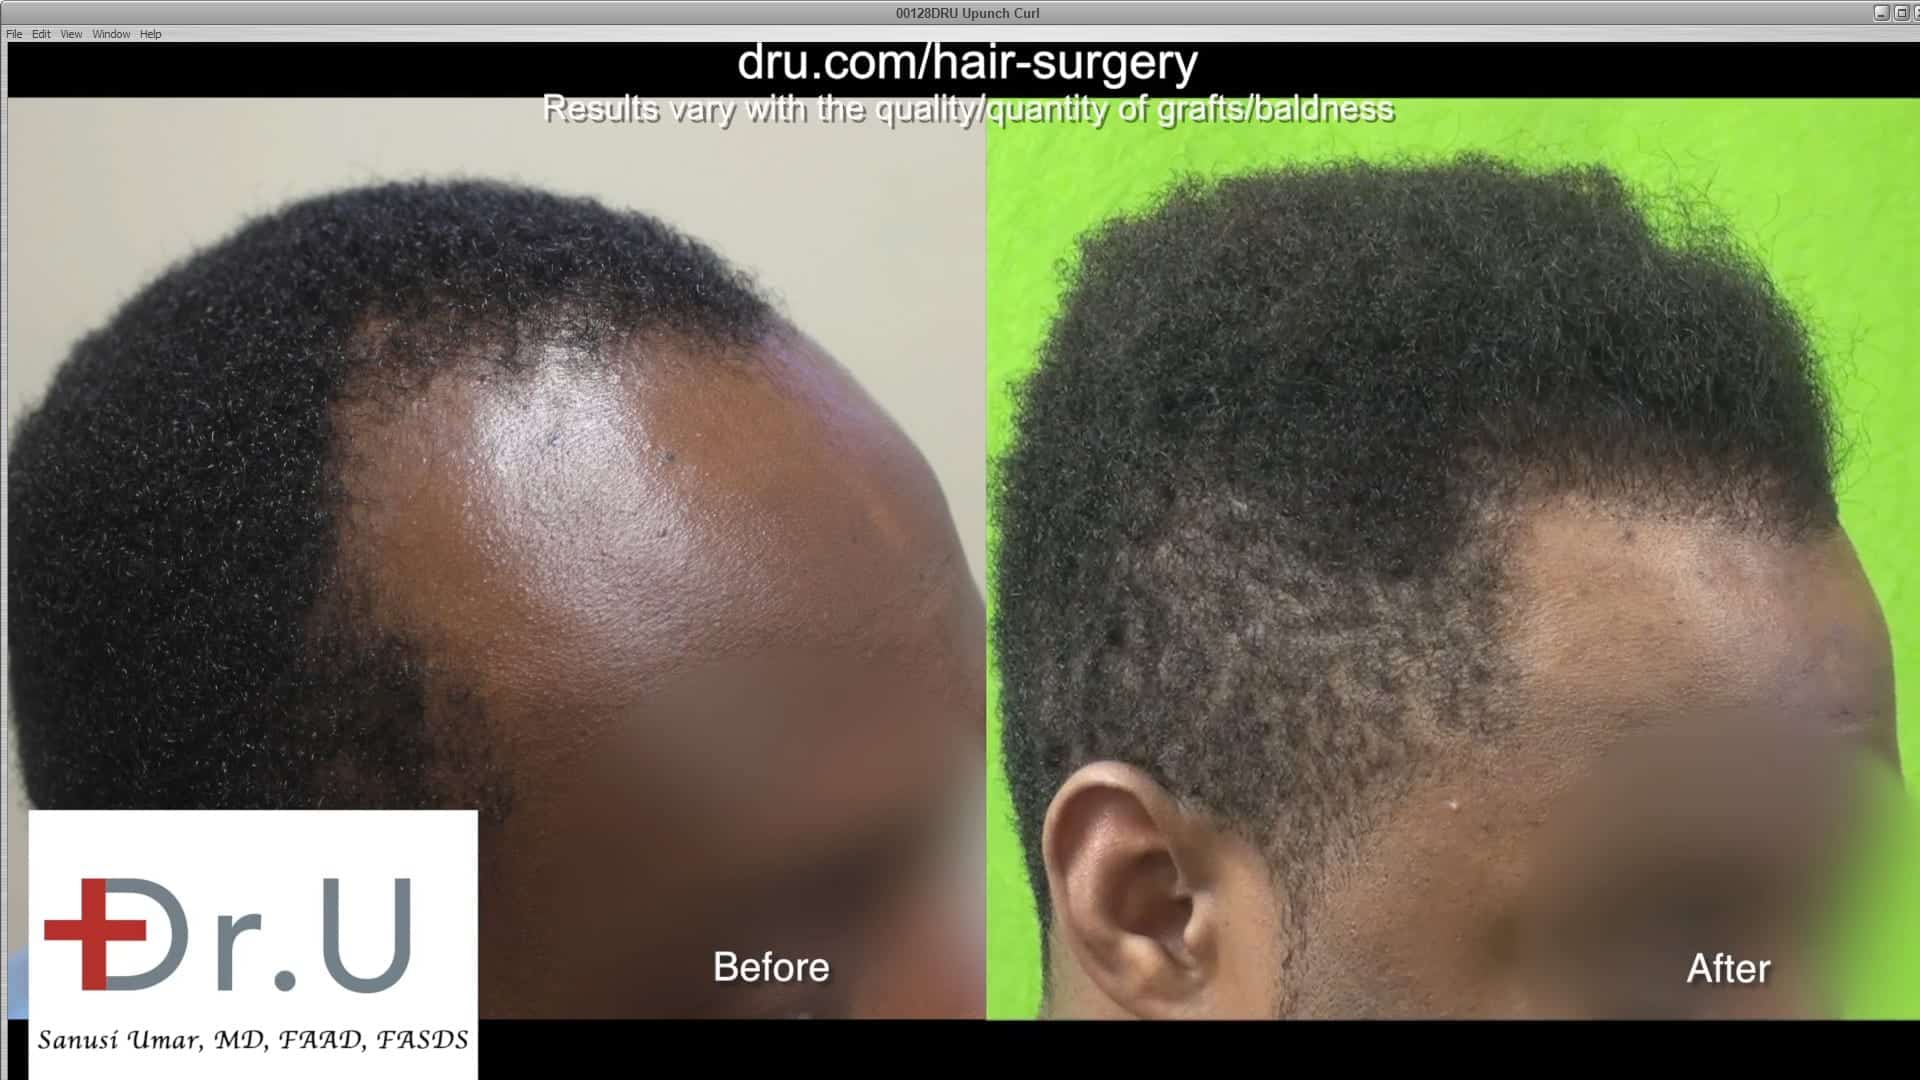 Video - Linear Scar Free Black Hair Restoration For All African Hair